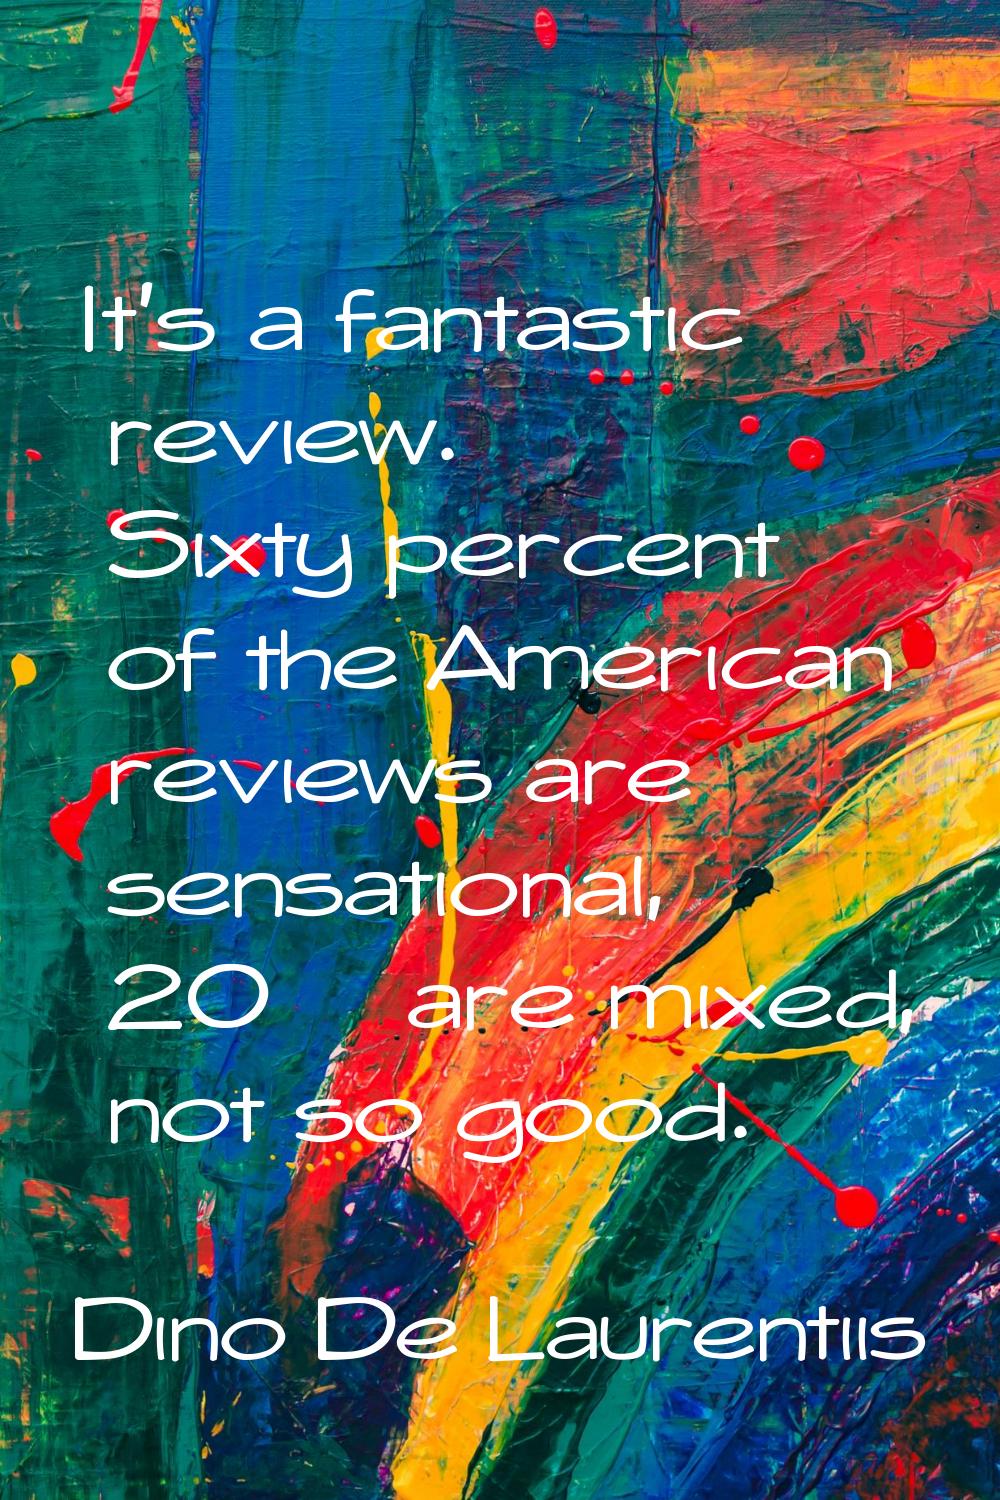 It's a fantastic review. Sixty percent of the American reviews are sensational, 20% are mixed, not 